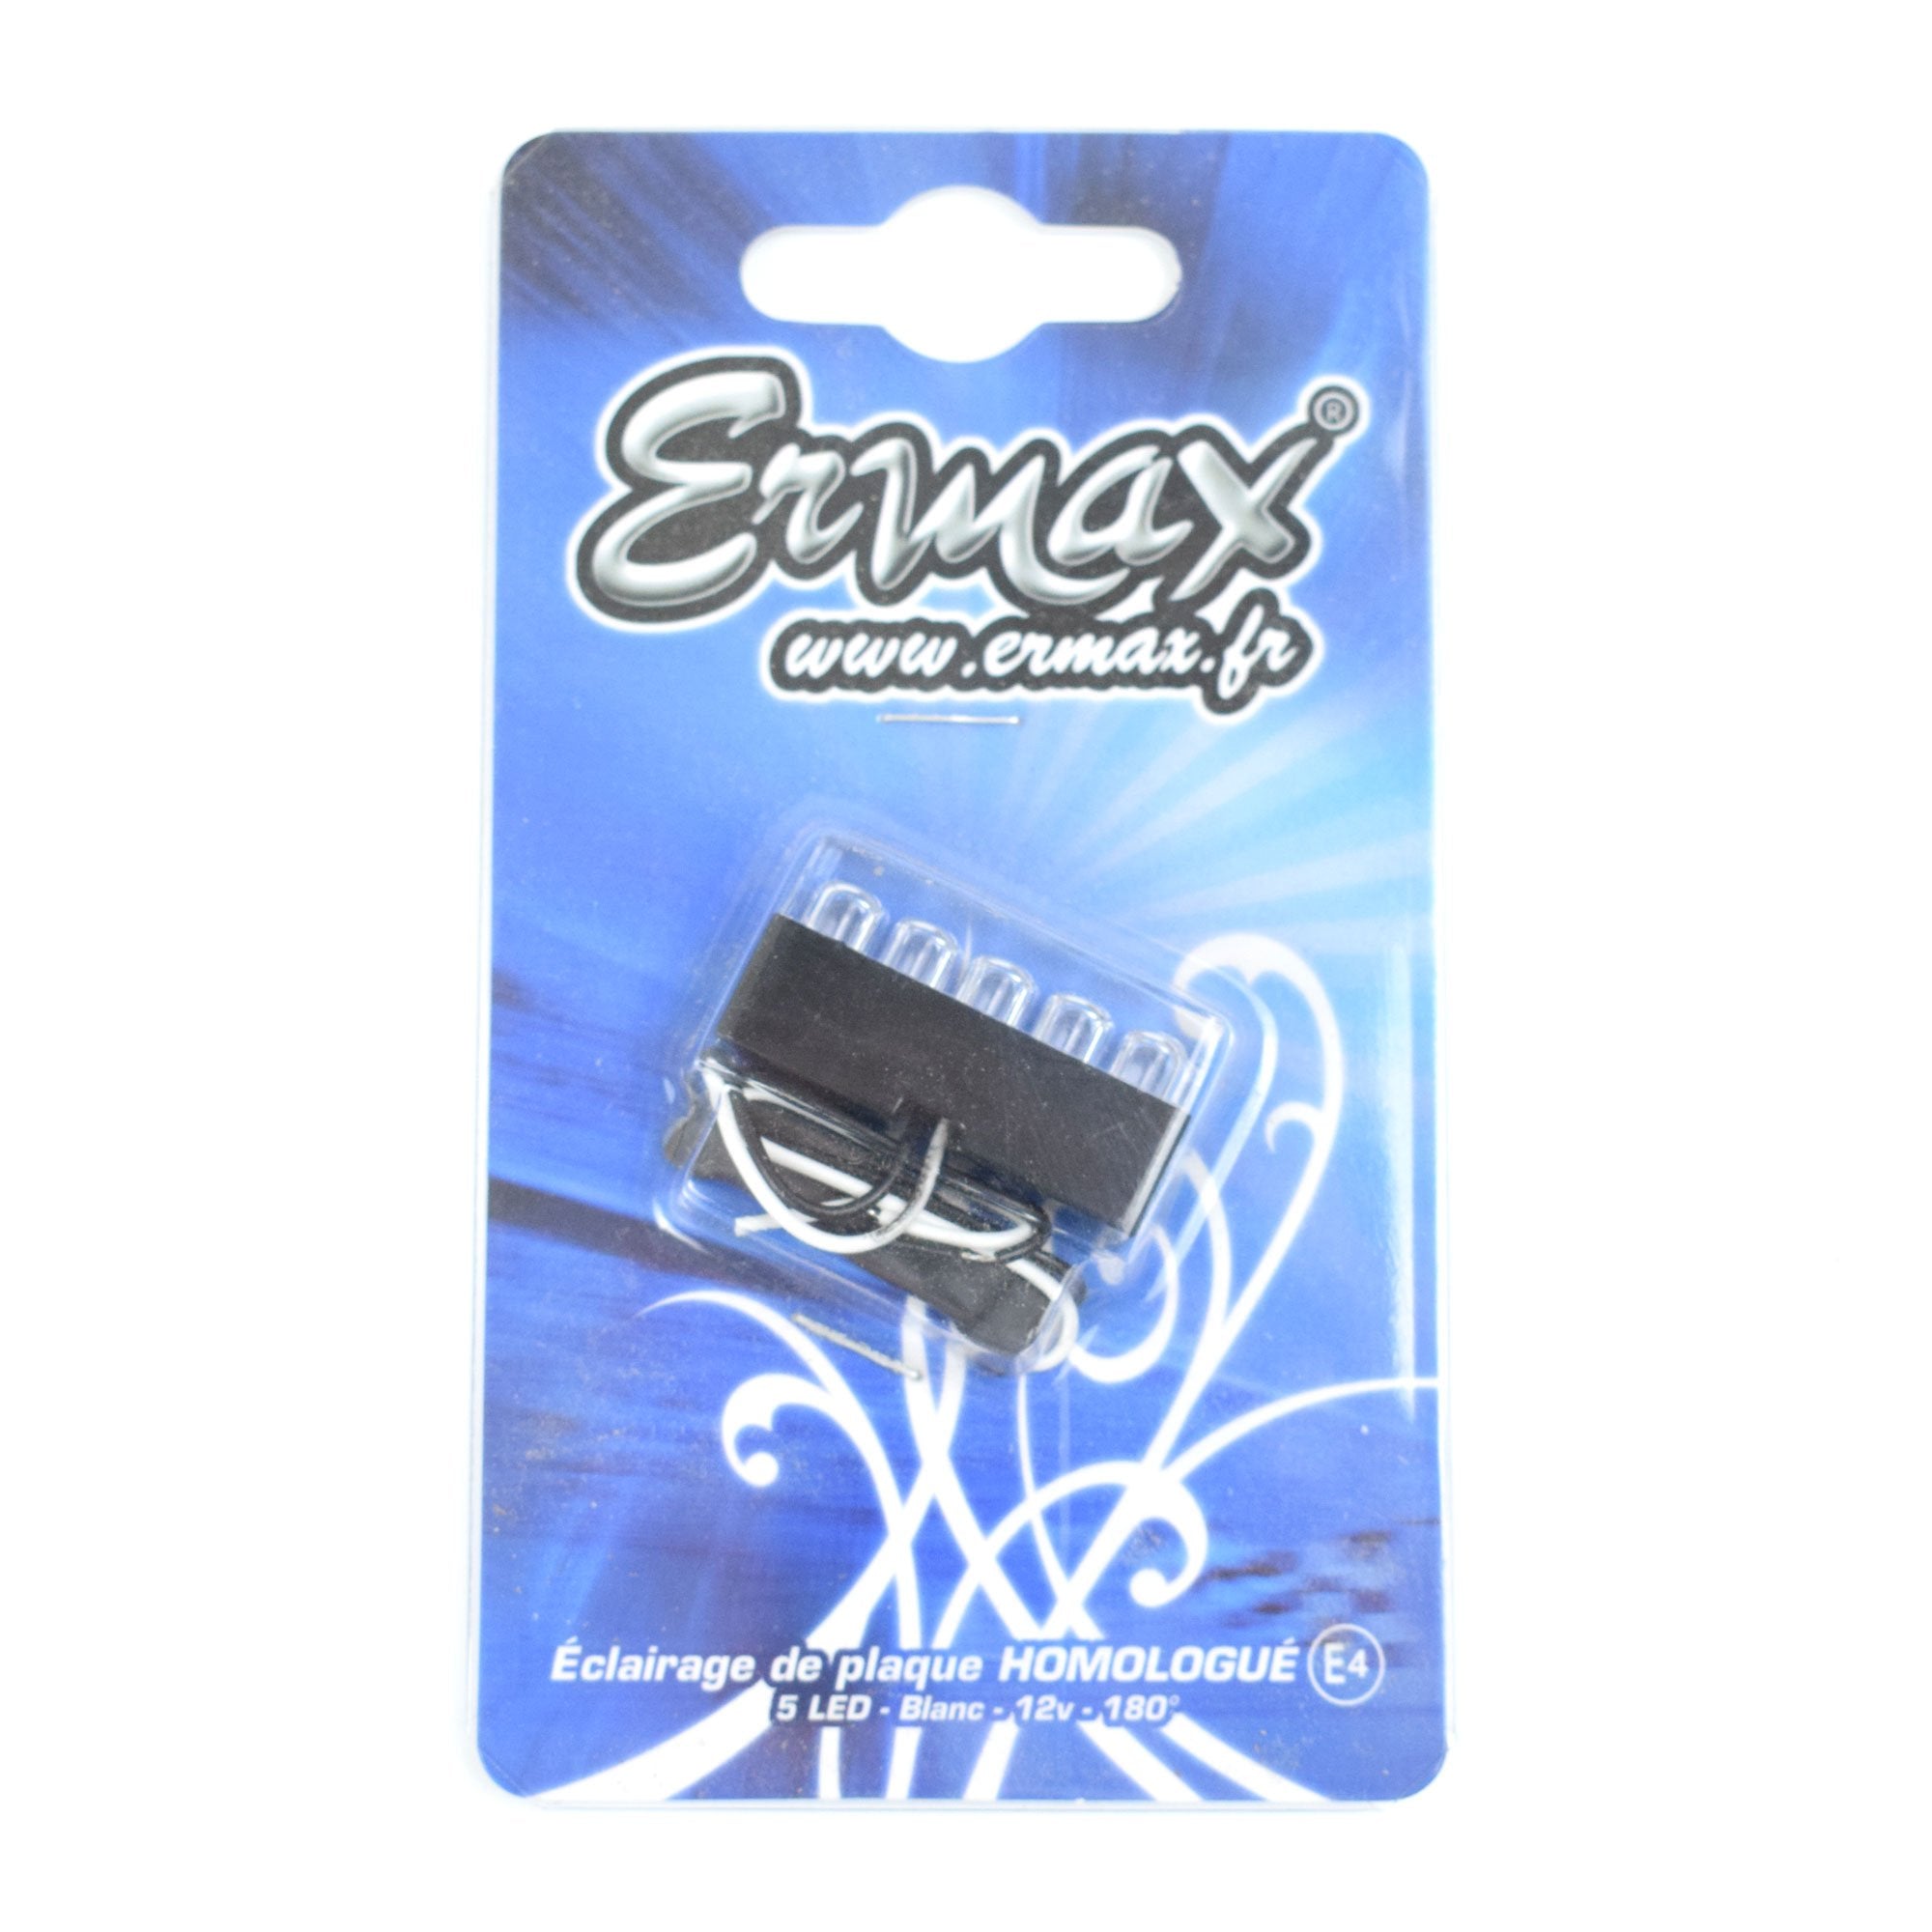 Ermax Plate Light | Clear LED without Black Casing-E910501051-Lights-Pyramid Motorcycle Accessories